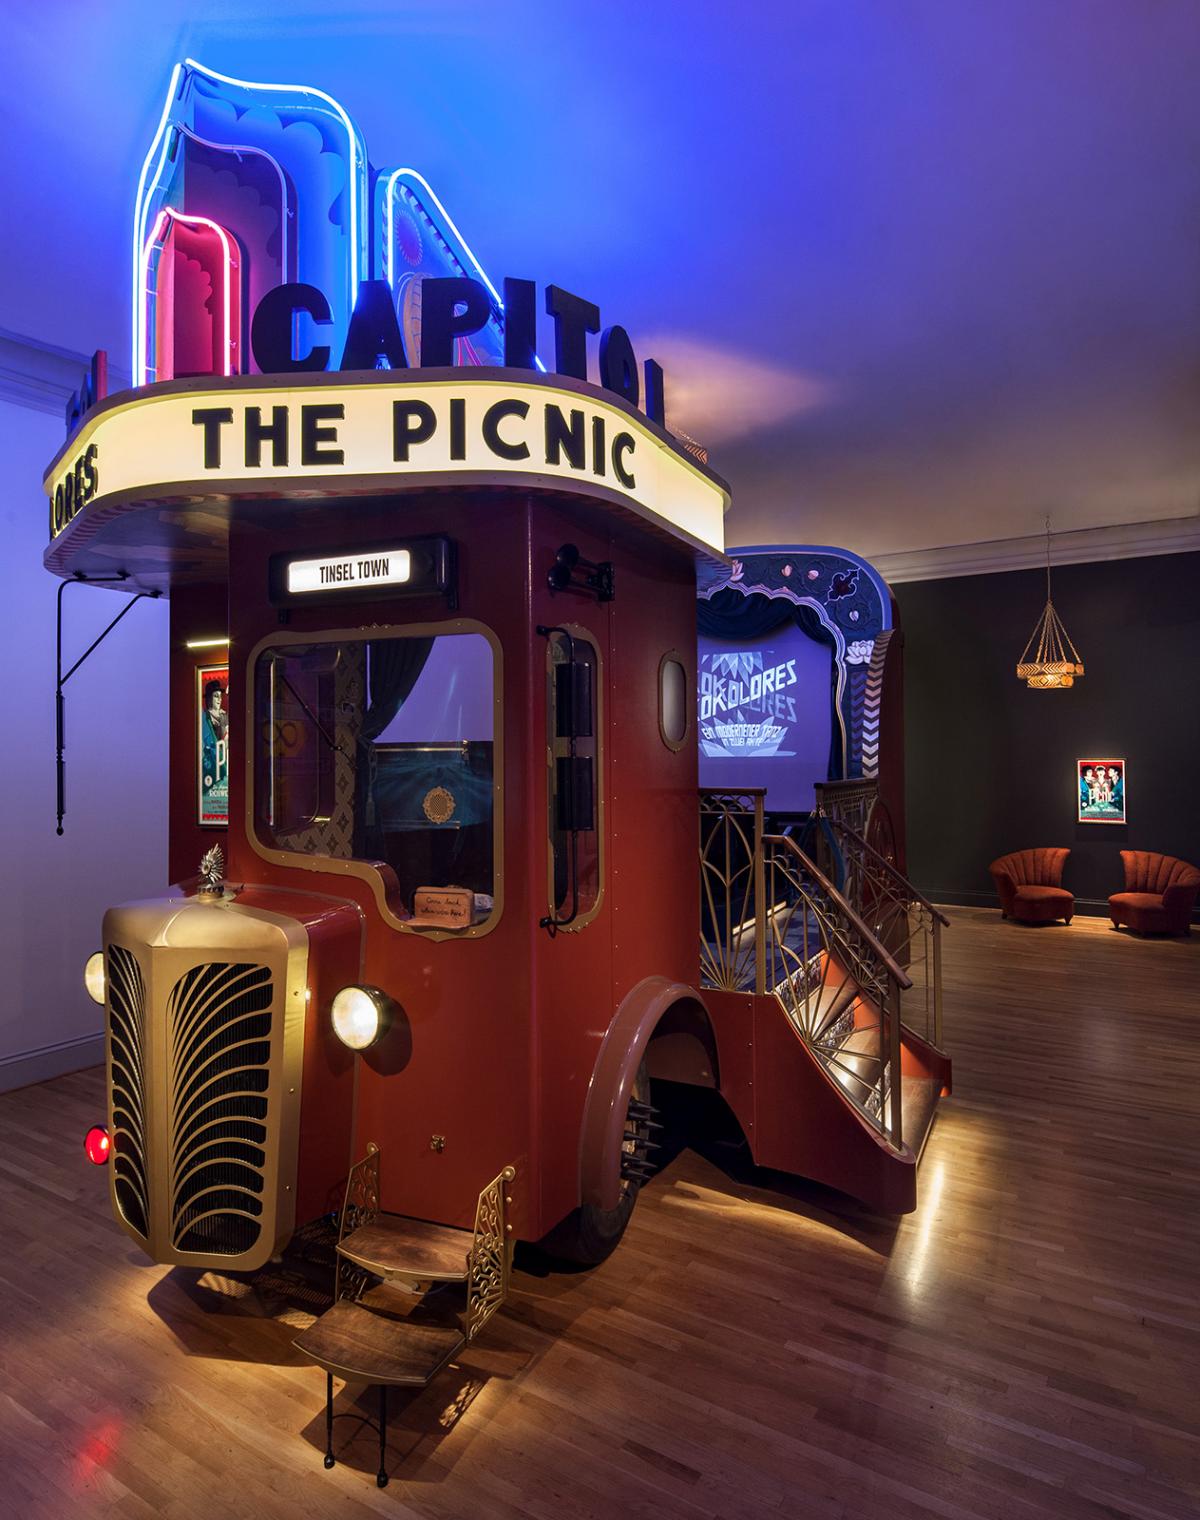 An image of capitol theater, a portable movie theater inside the Renwick Gallery.